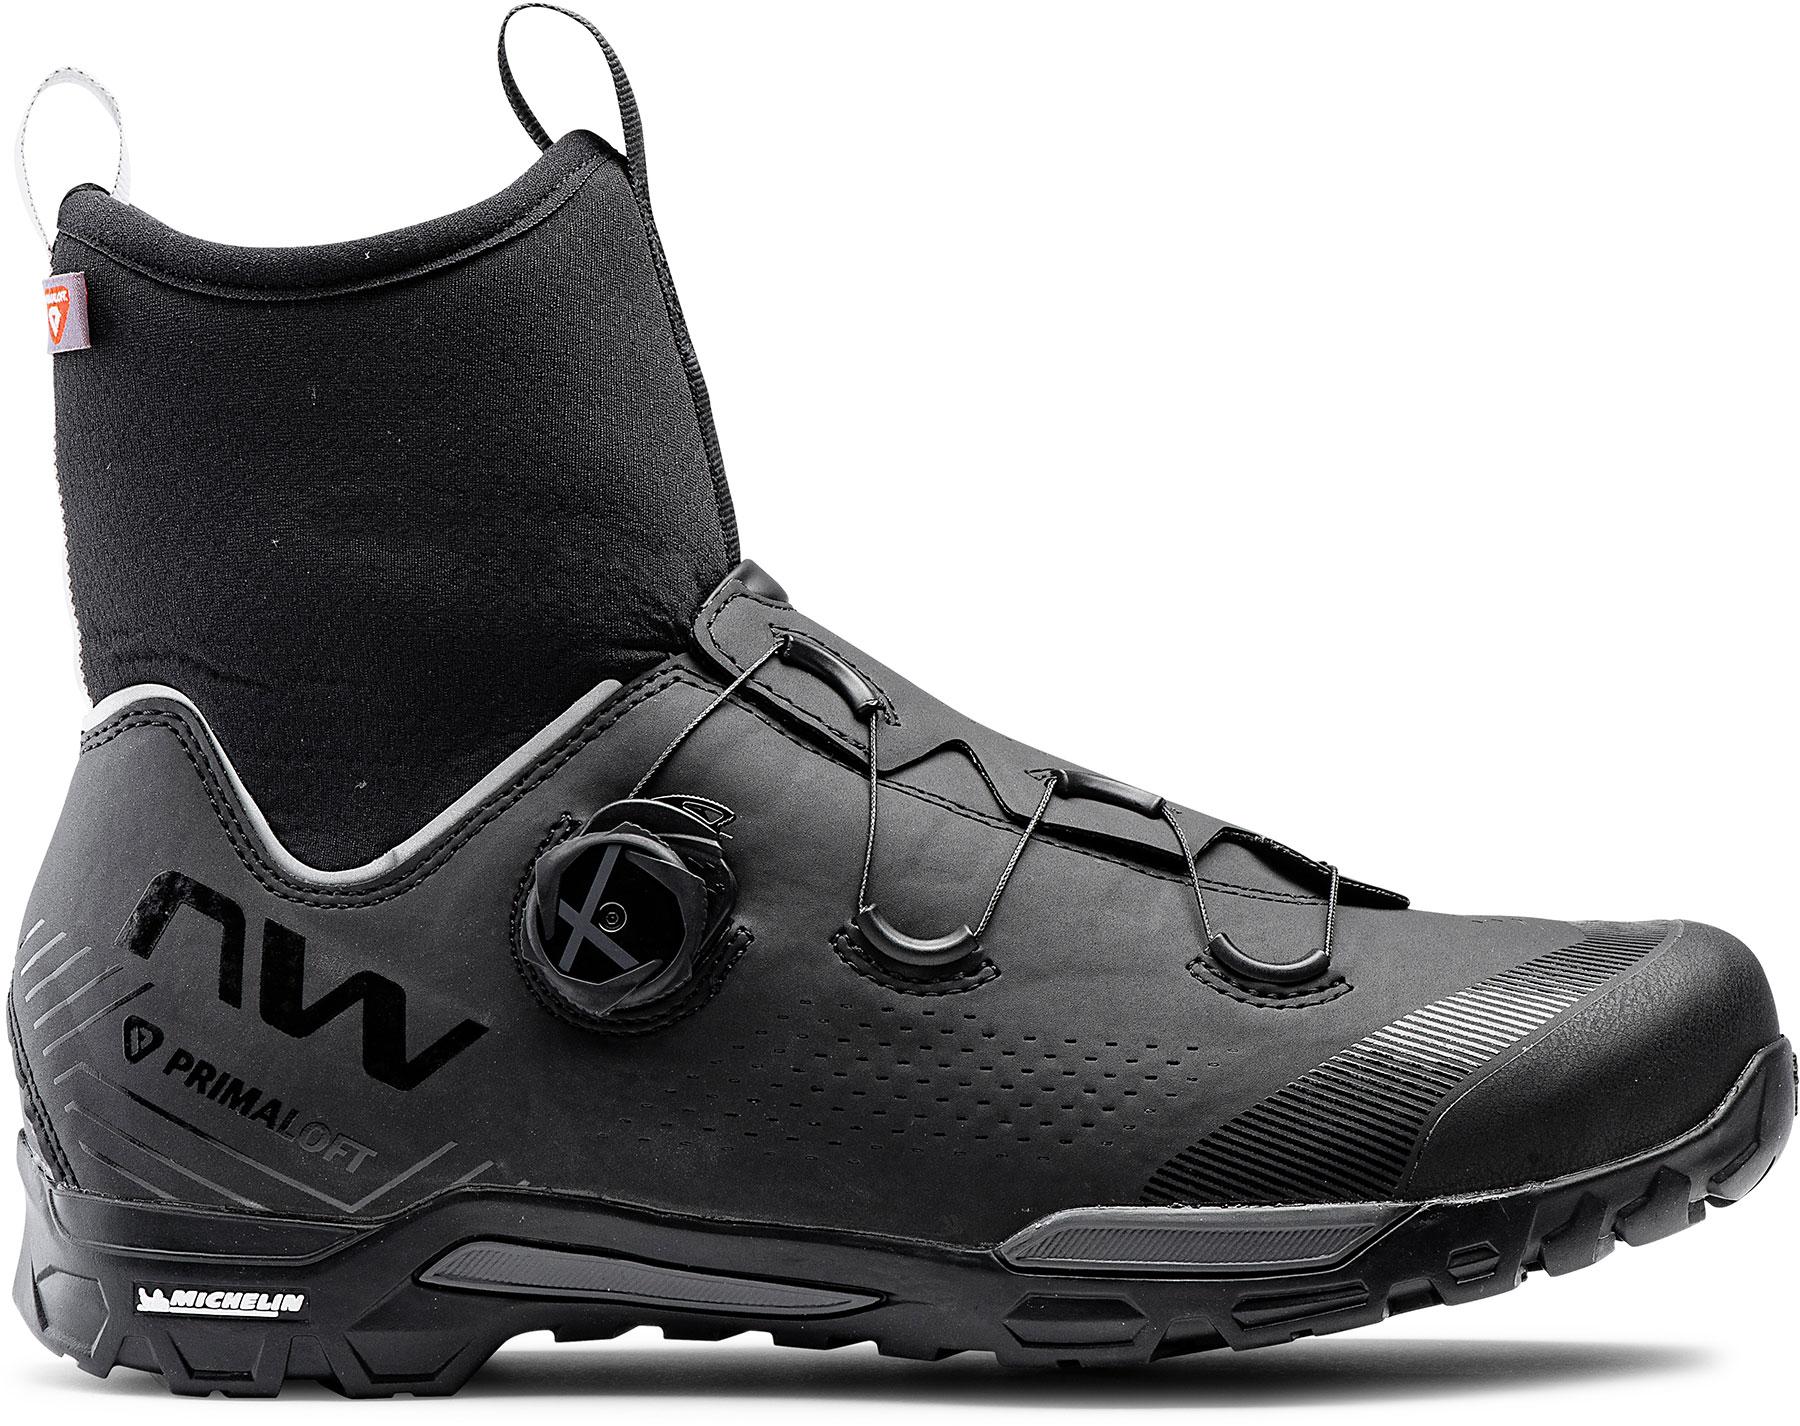 Northwave X-magma Core Winter Boots - Black